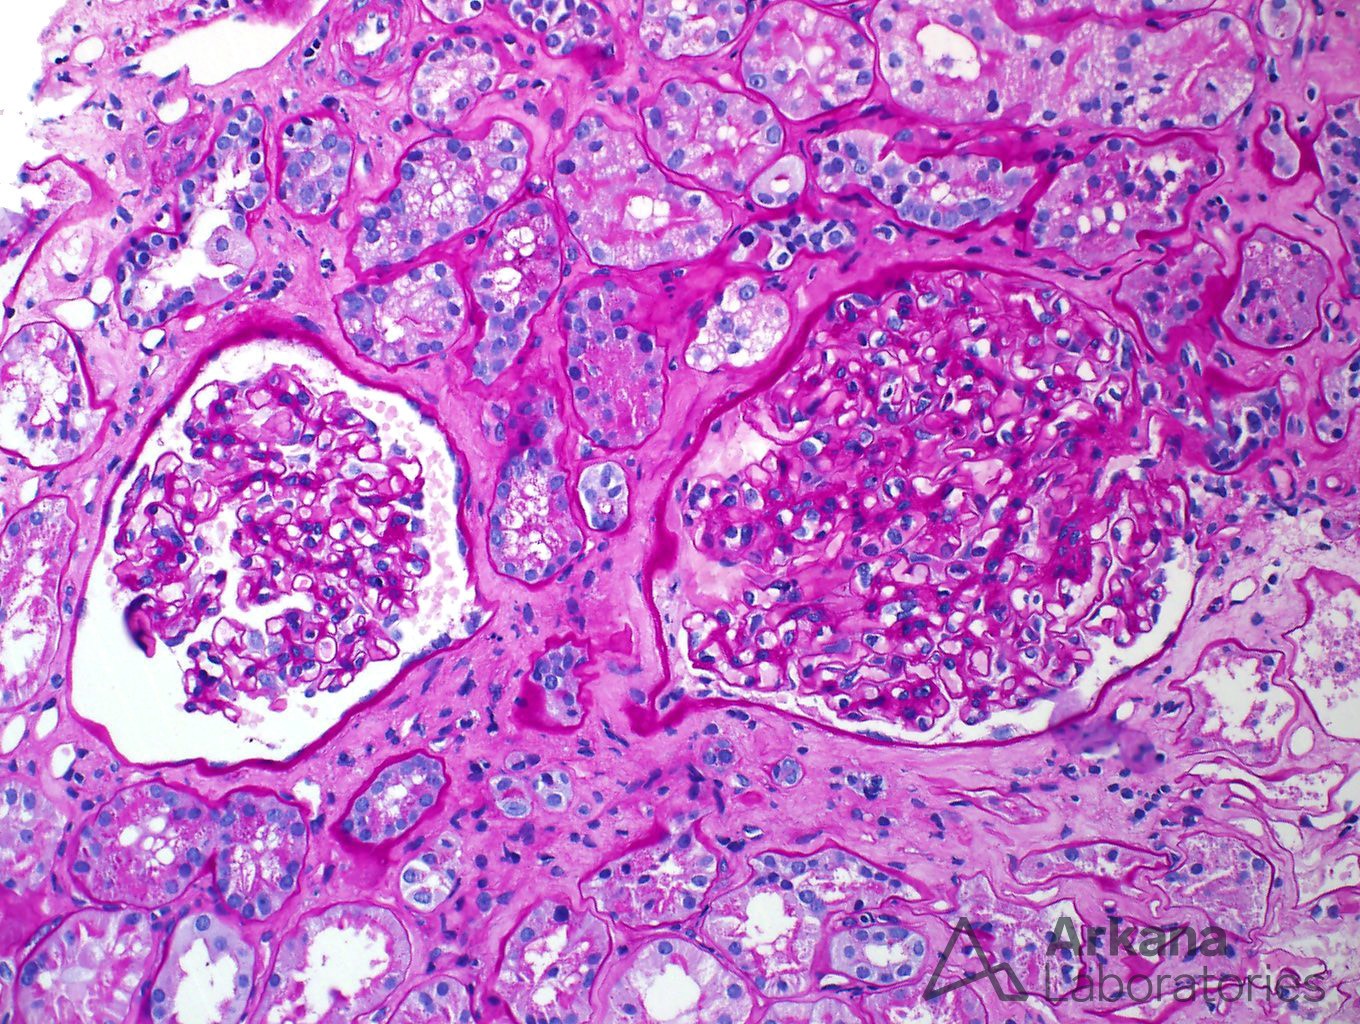 Amyloid deposits were not identified in the glomeruli under light stain image